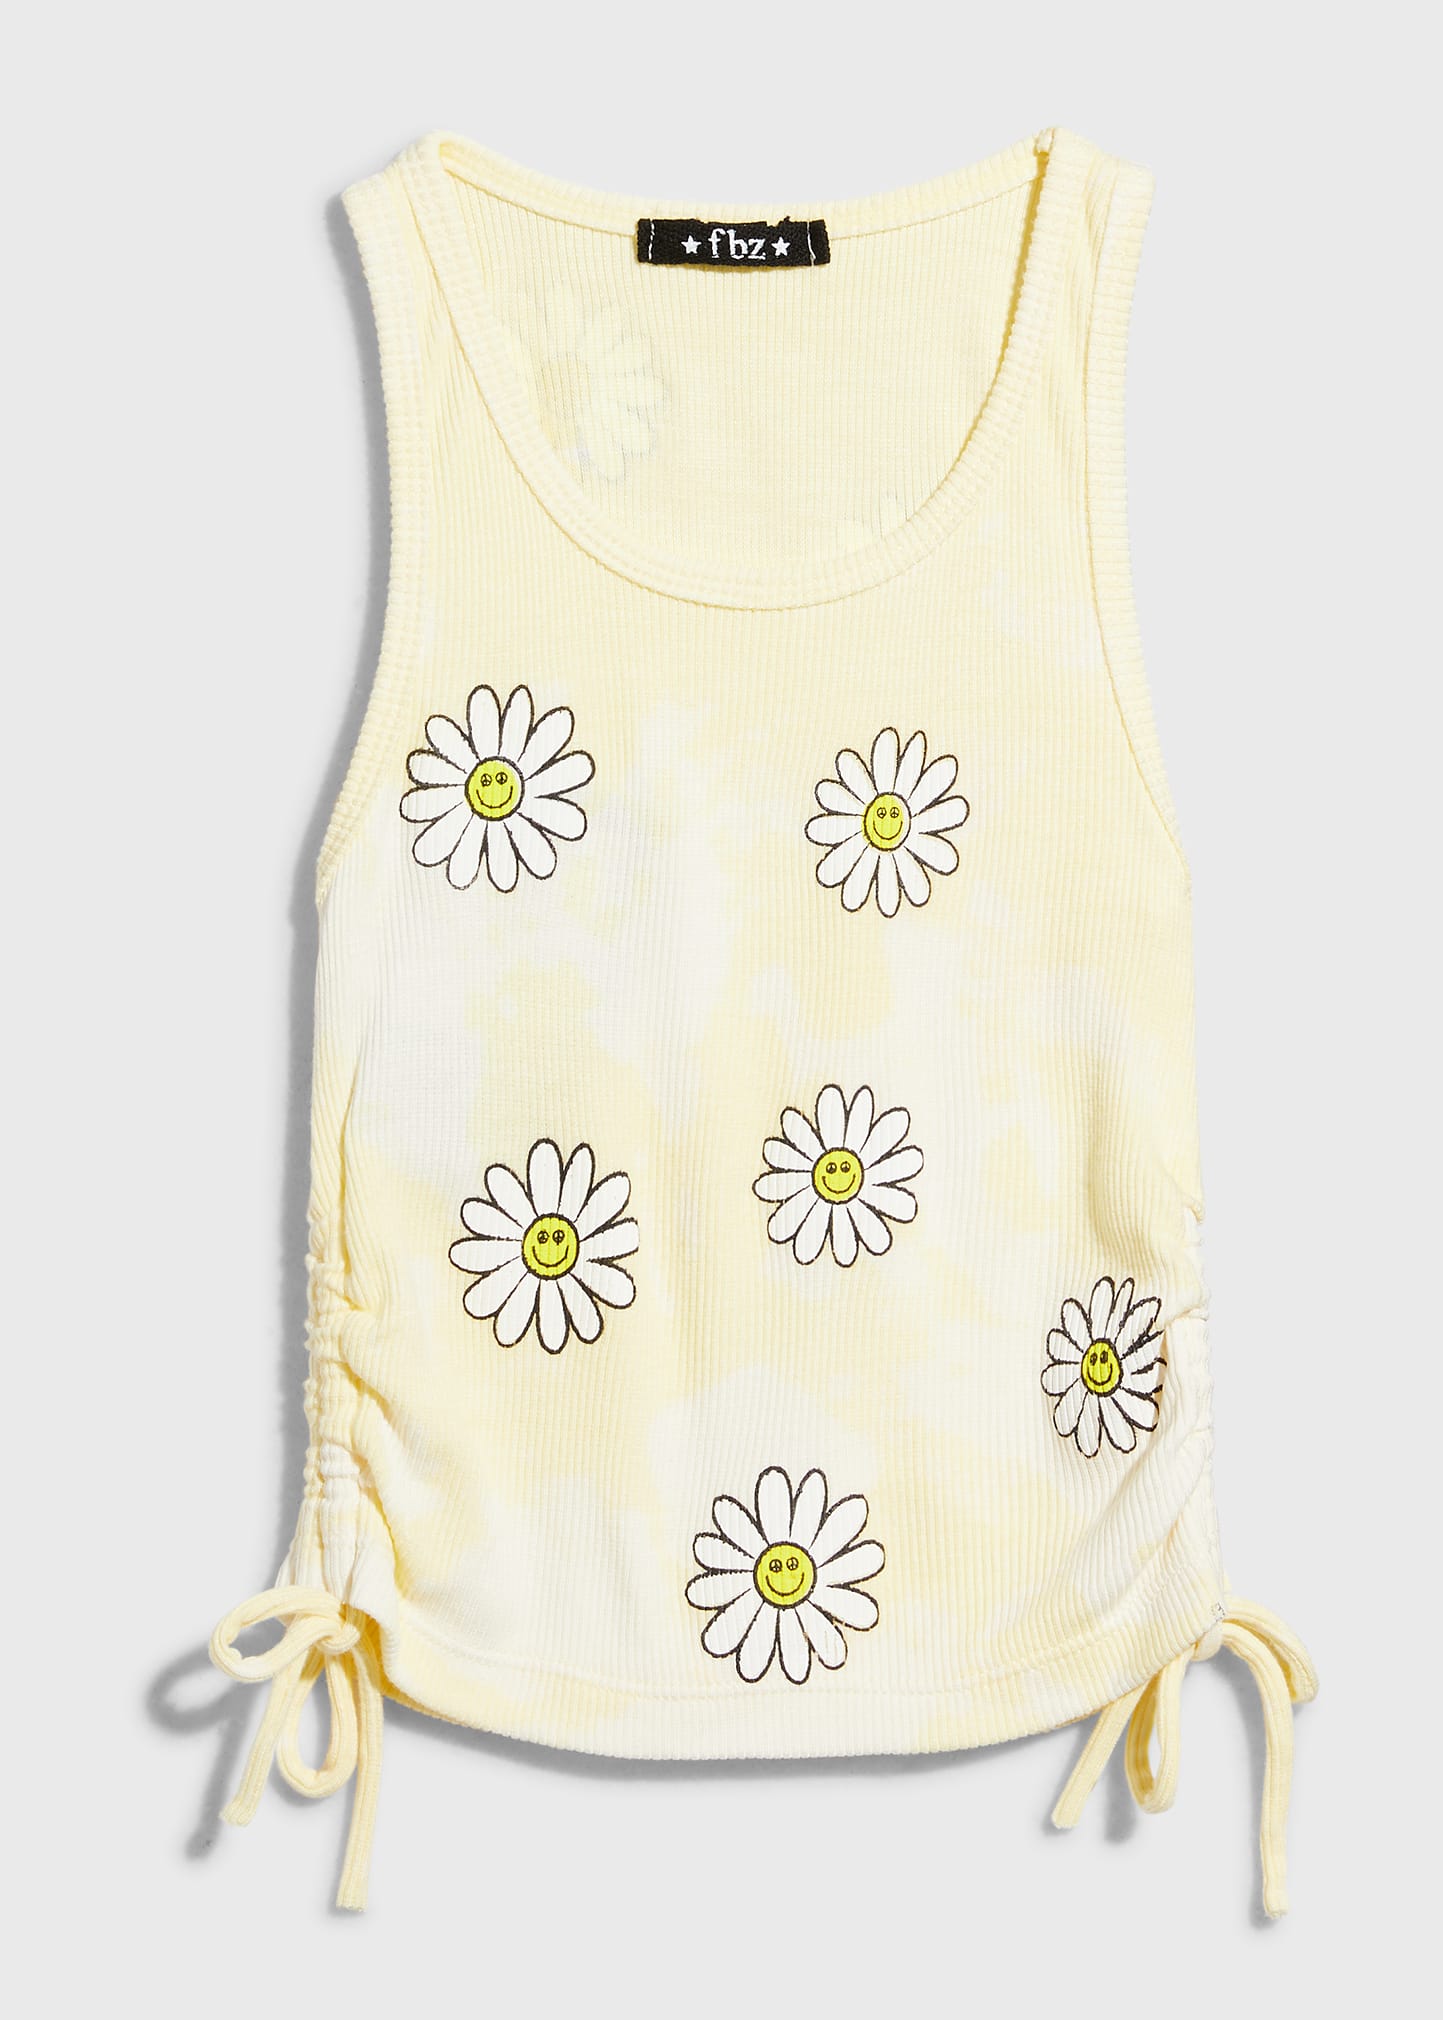 Girls Ribbed Tank Top Flowers by Zoe 100% Cotton 4 Different Prints